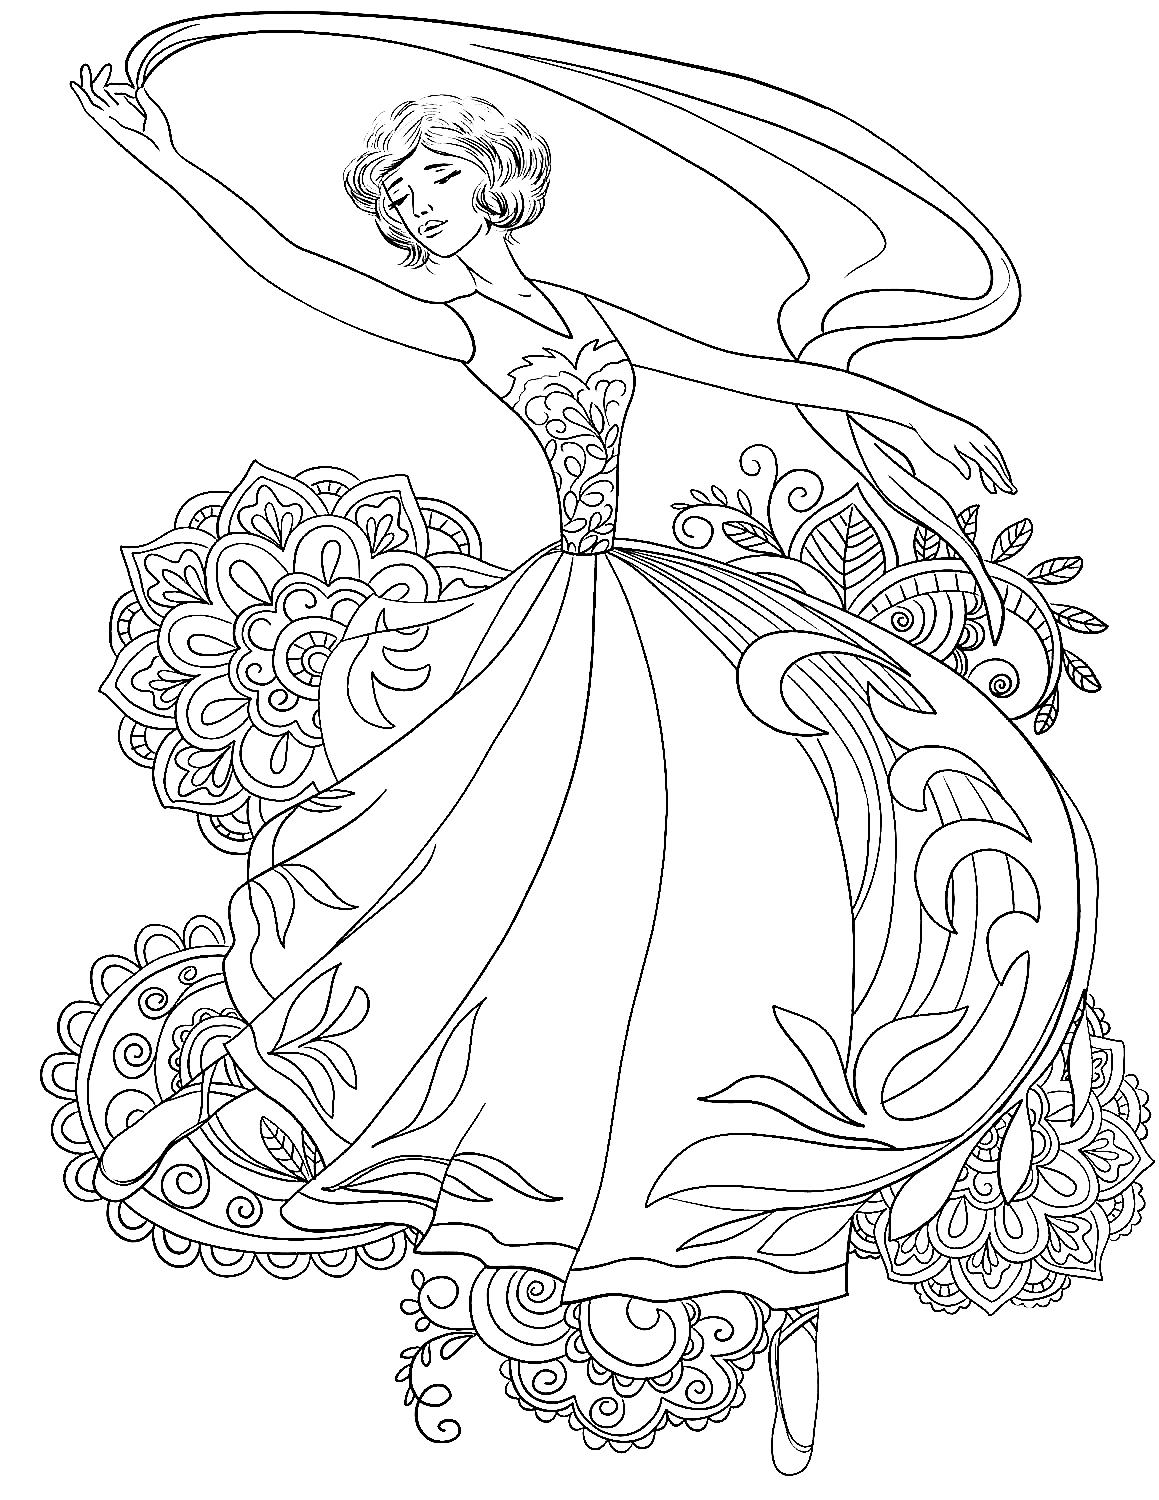 Ballerina Dancing with Shawl Coloring Page